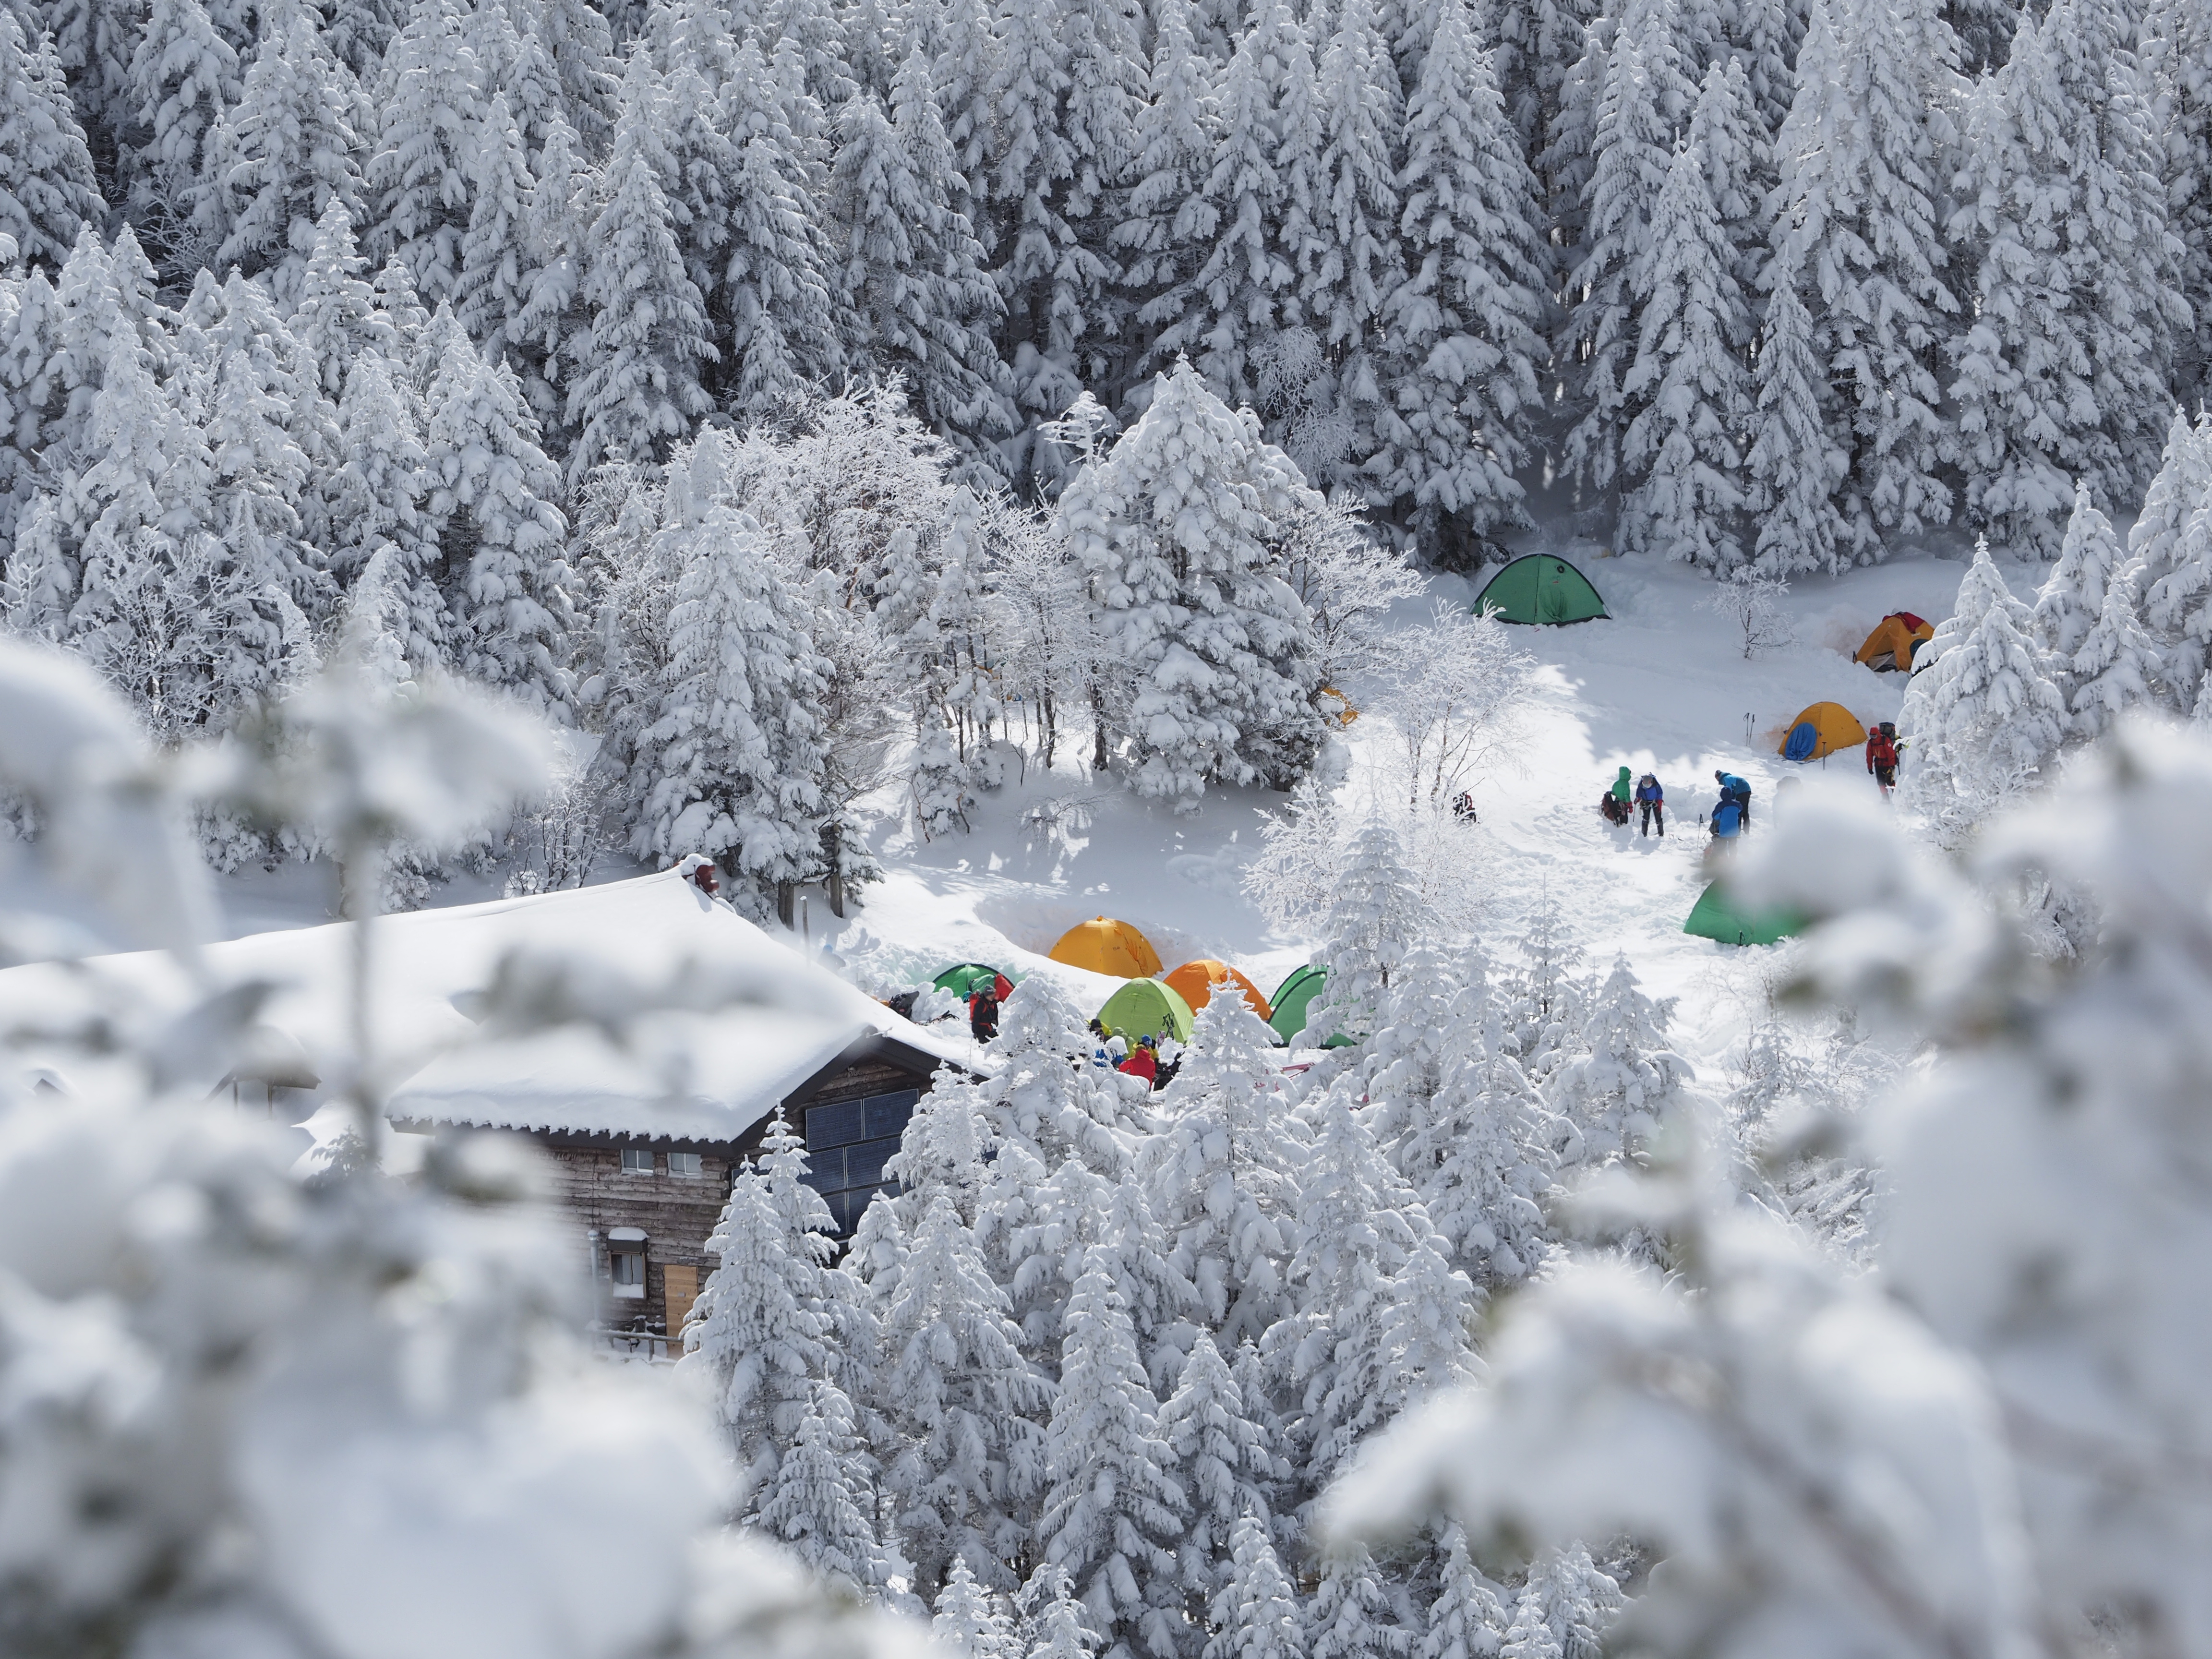 1920x1080 Background winter, snow, miscellanea, miscellaneous, forest, camping, campsite, tents